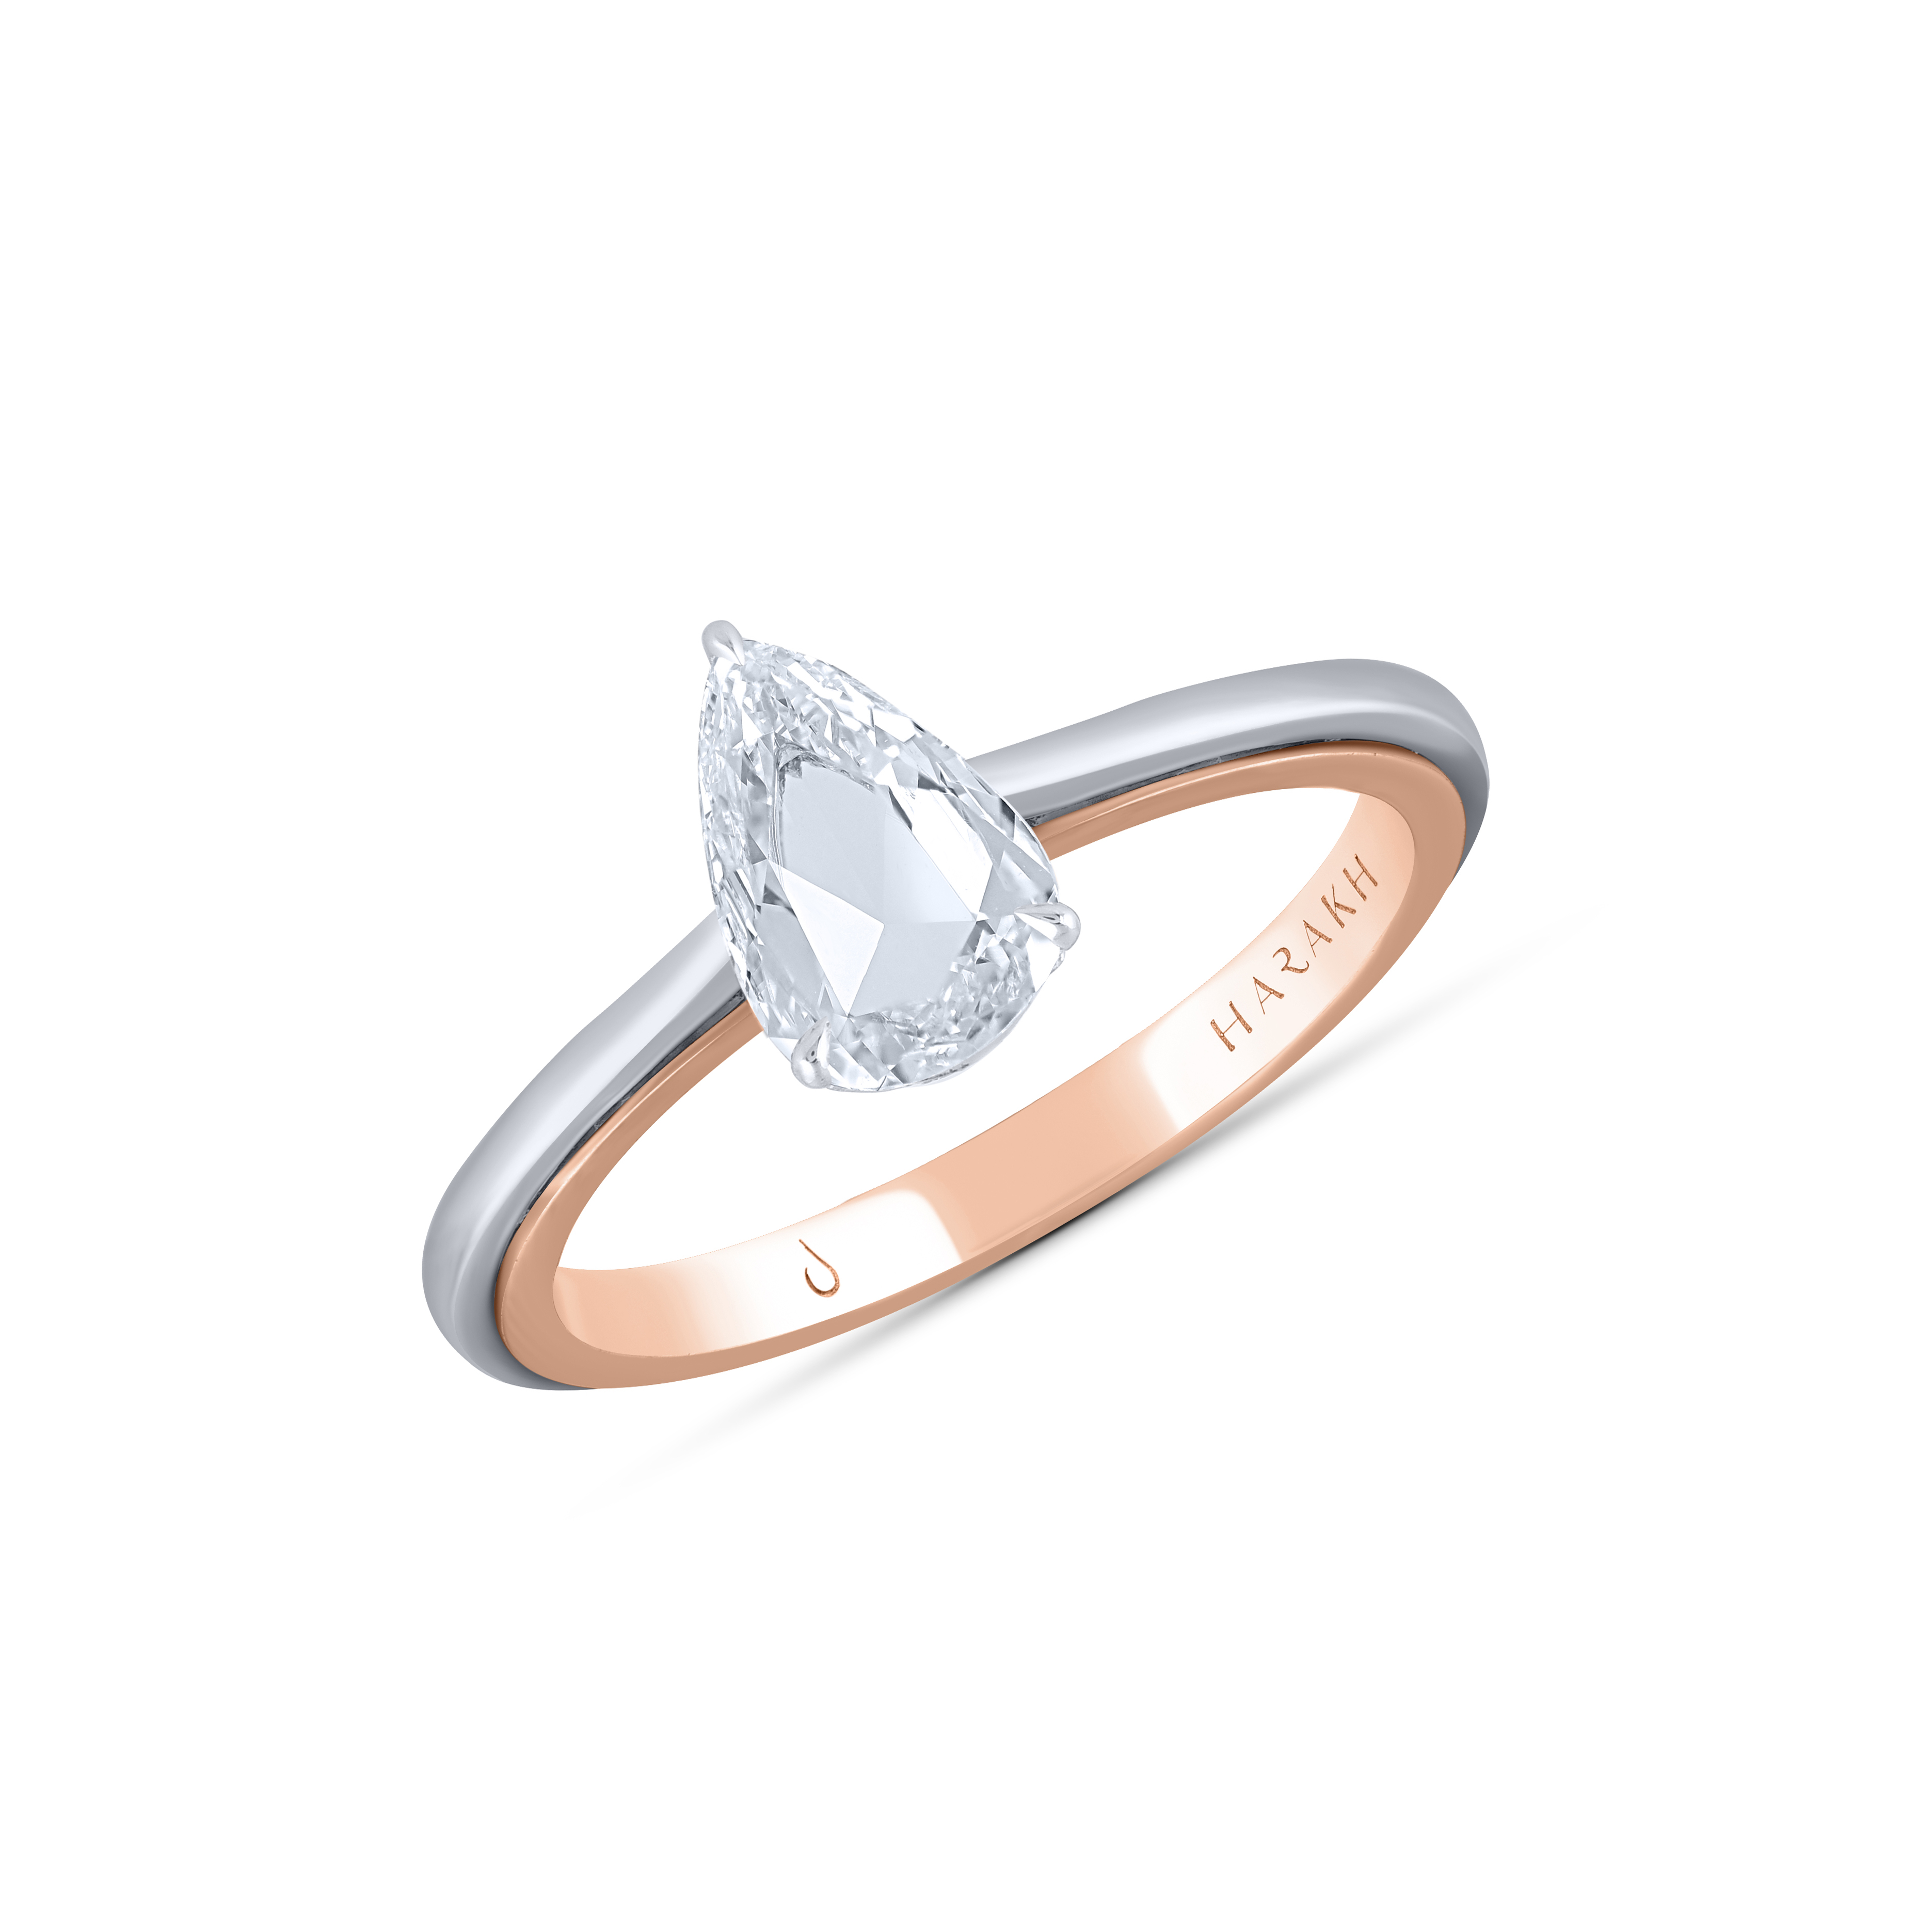 Two-Toned Diamond Engagement Ring